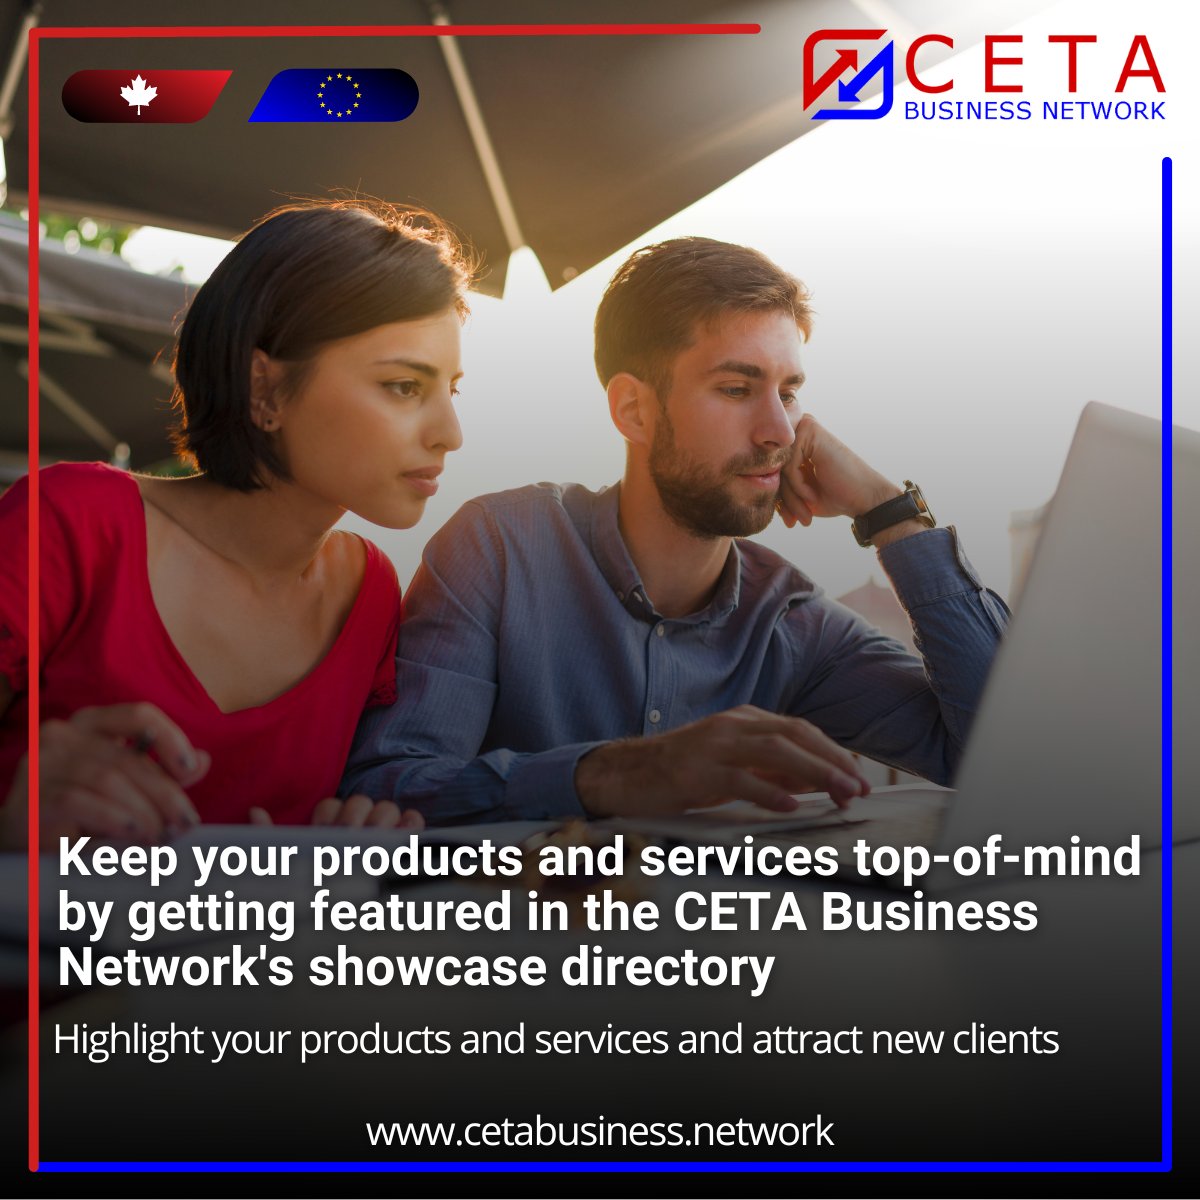 The #CETABusinessNetwork's #showcase #directory is the ultimate destination for #businesses looking to showcase their #products and #services and attract new #clients. Get your business listed today!
cetabusiness.network/showcases/

#CETA #Business #Company